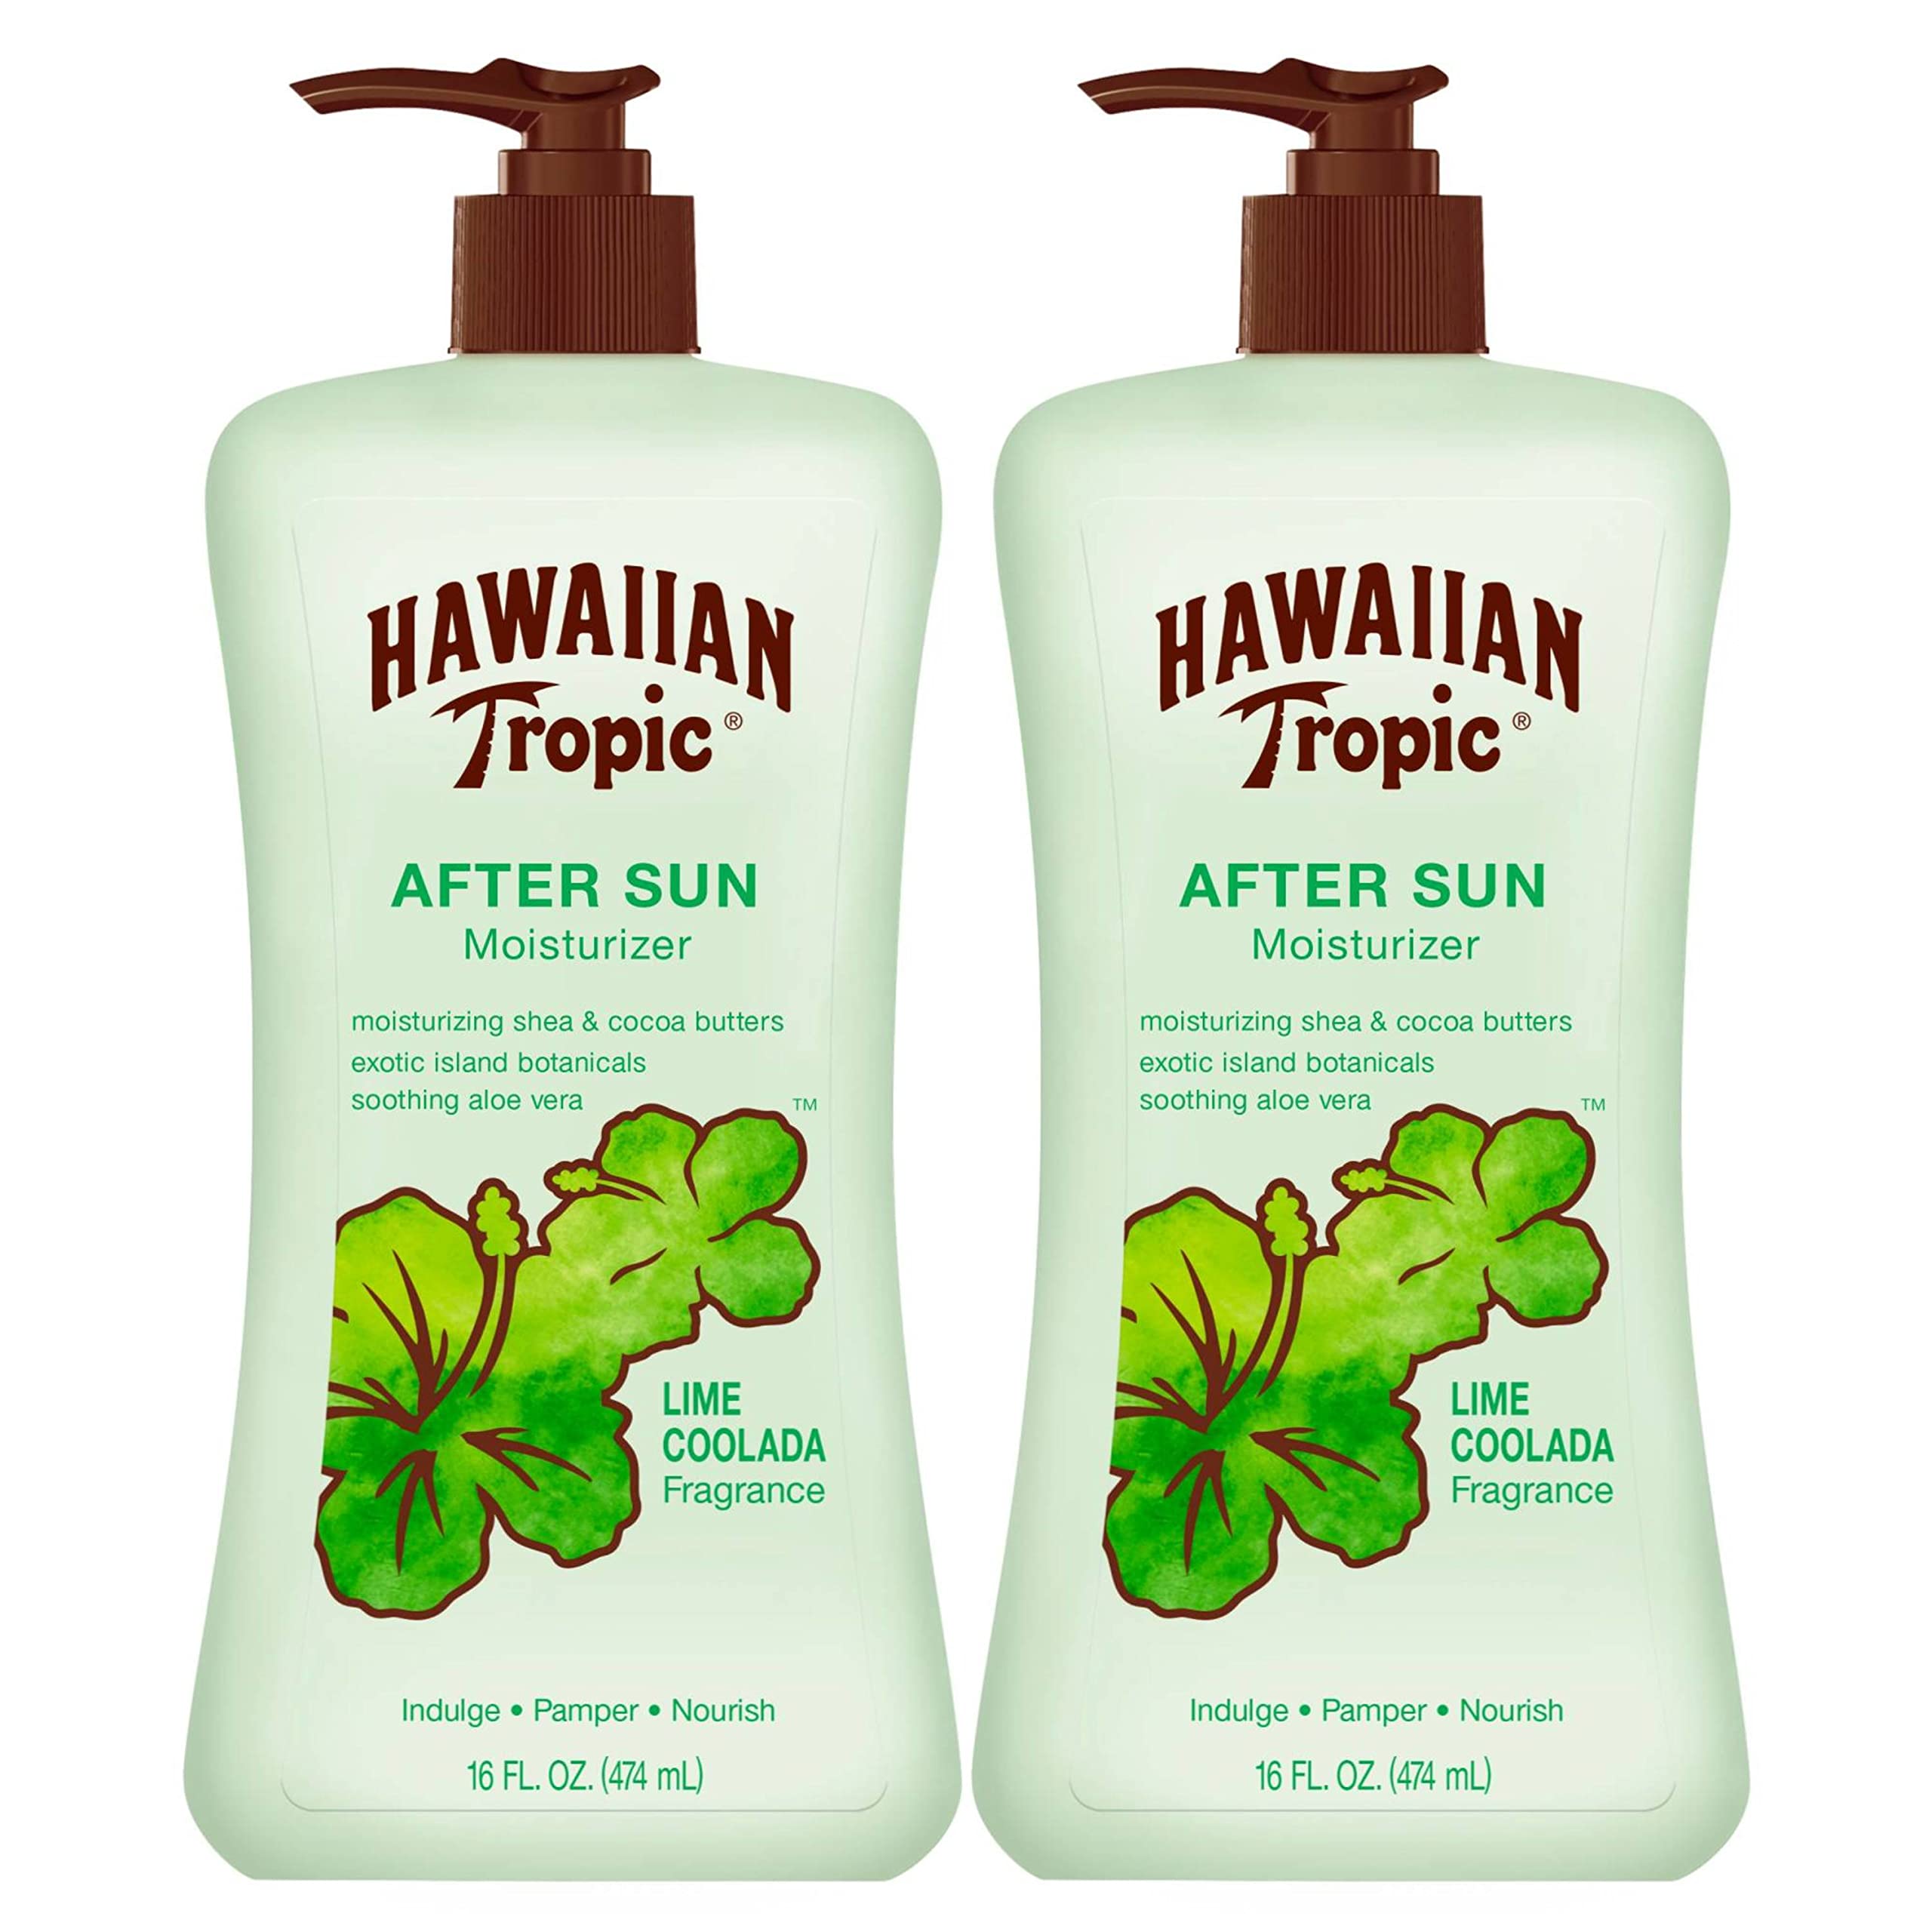 Hawaiian Tropic Lime Coolada Body Lotion and Daily Moisturizer After Sun, 16 Ounces - Pack of 2